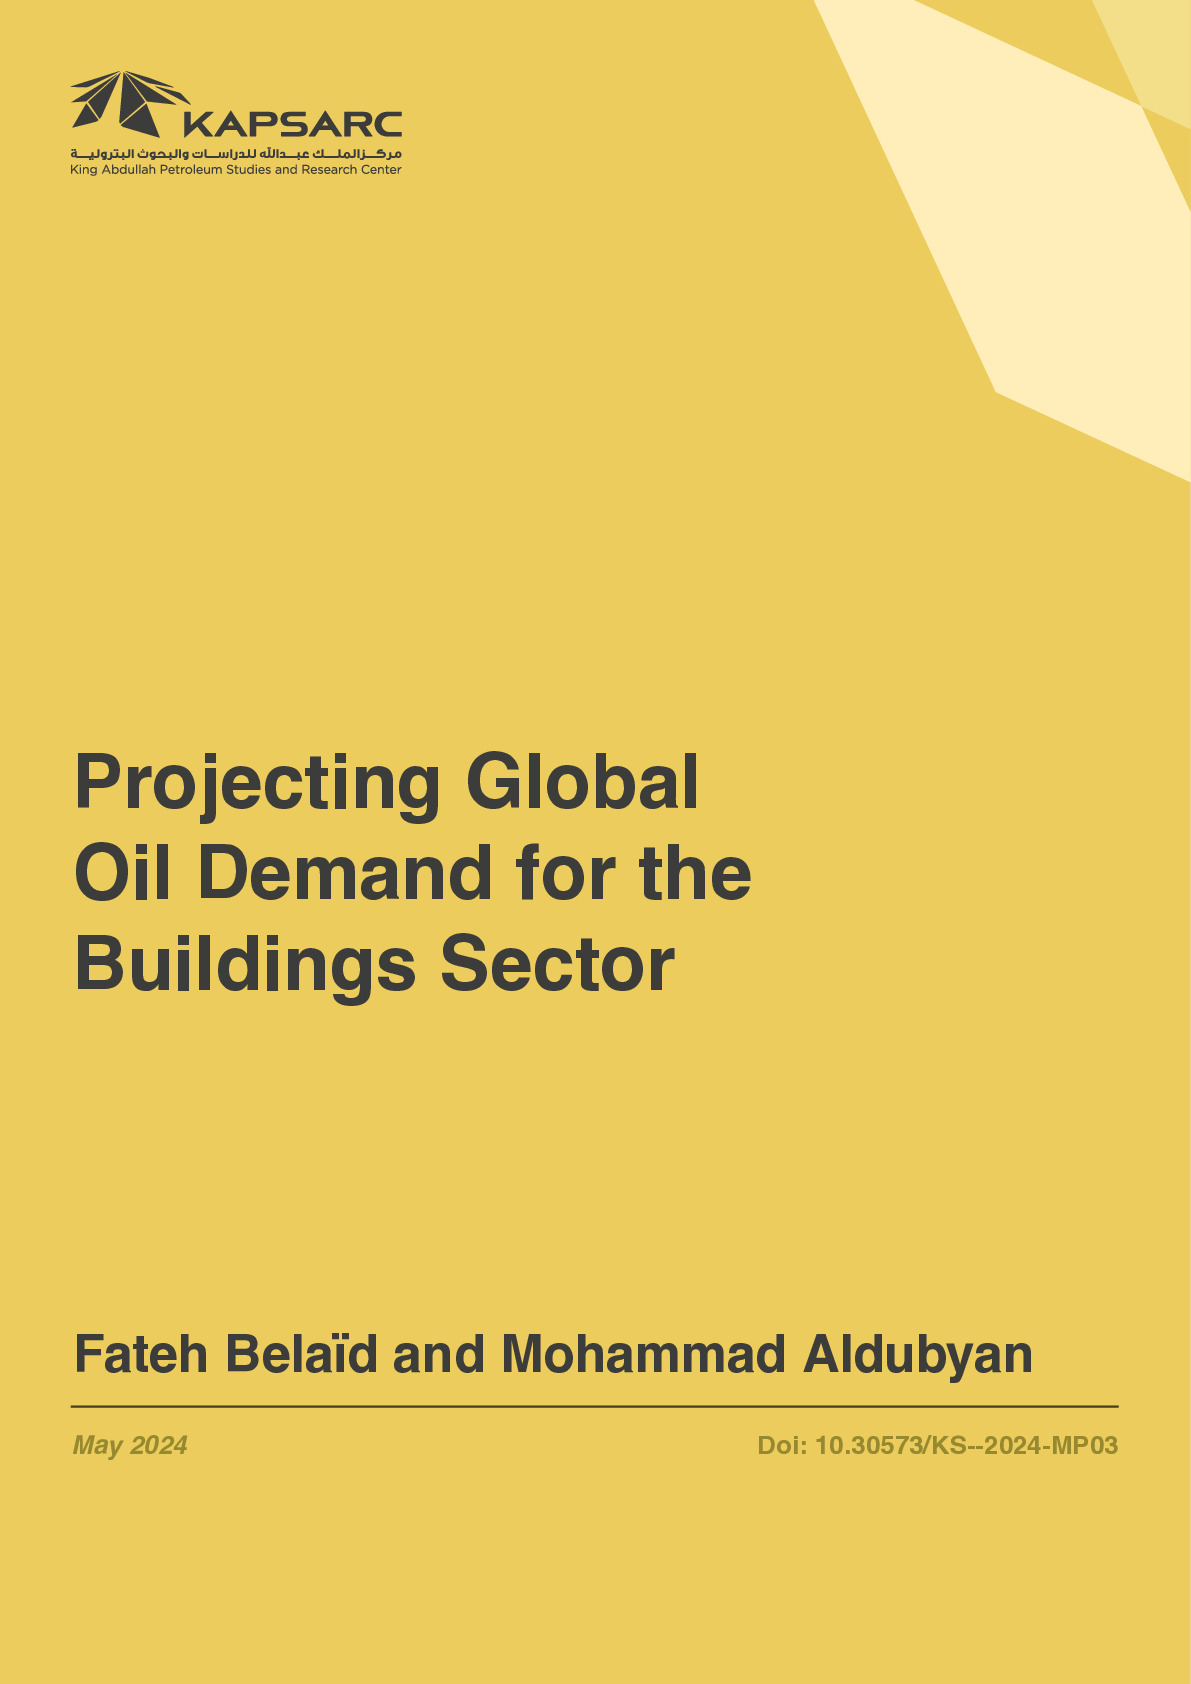 Projecting Global Oil Demand for the Buildings Sector